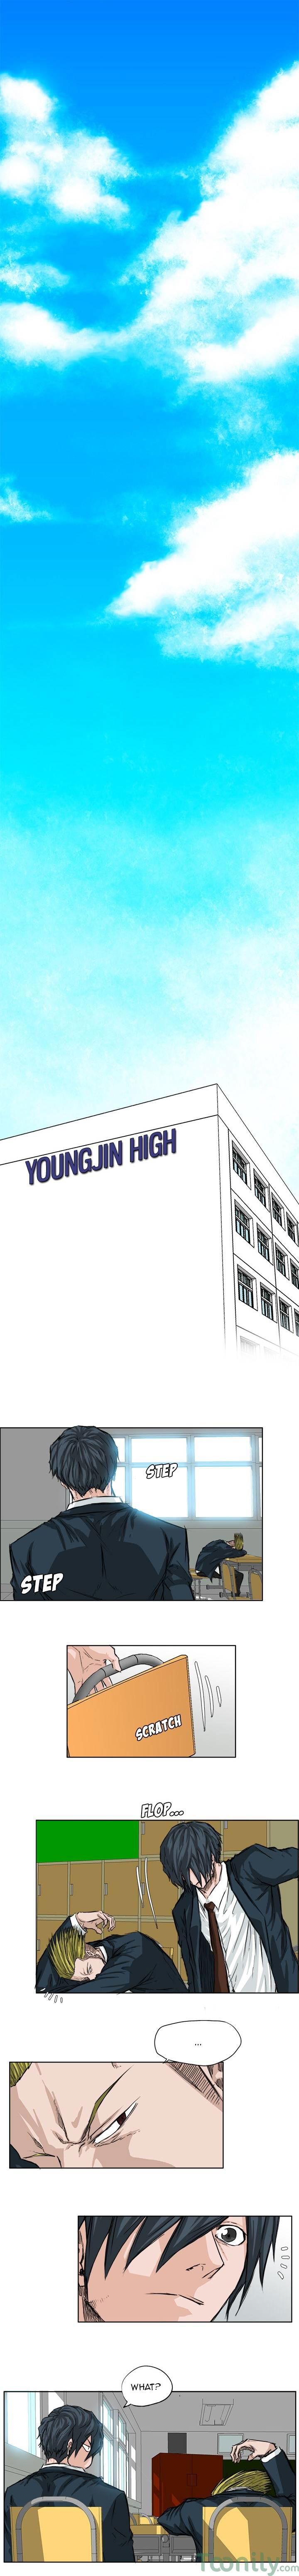 Boss in School Chapter 26 page 1